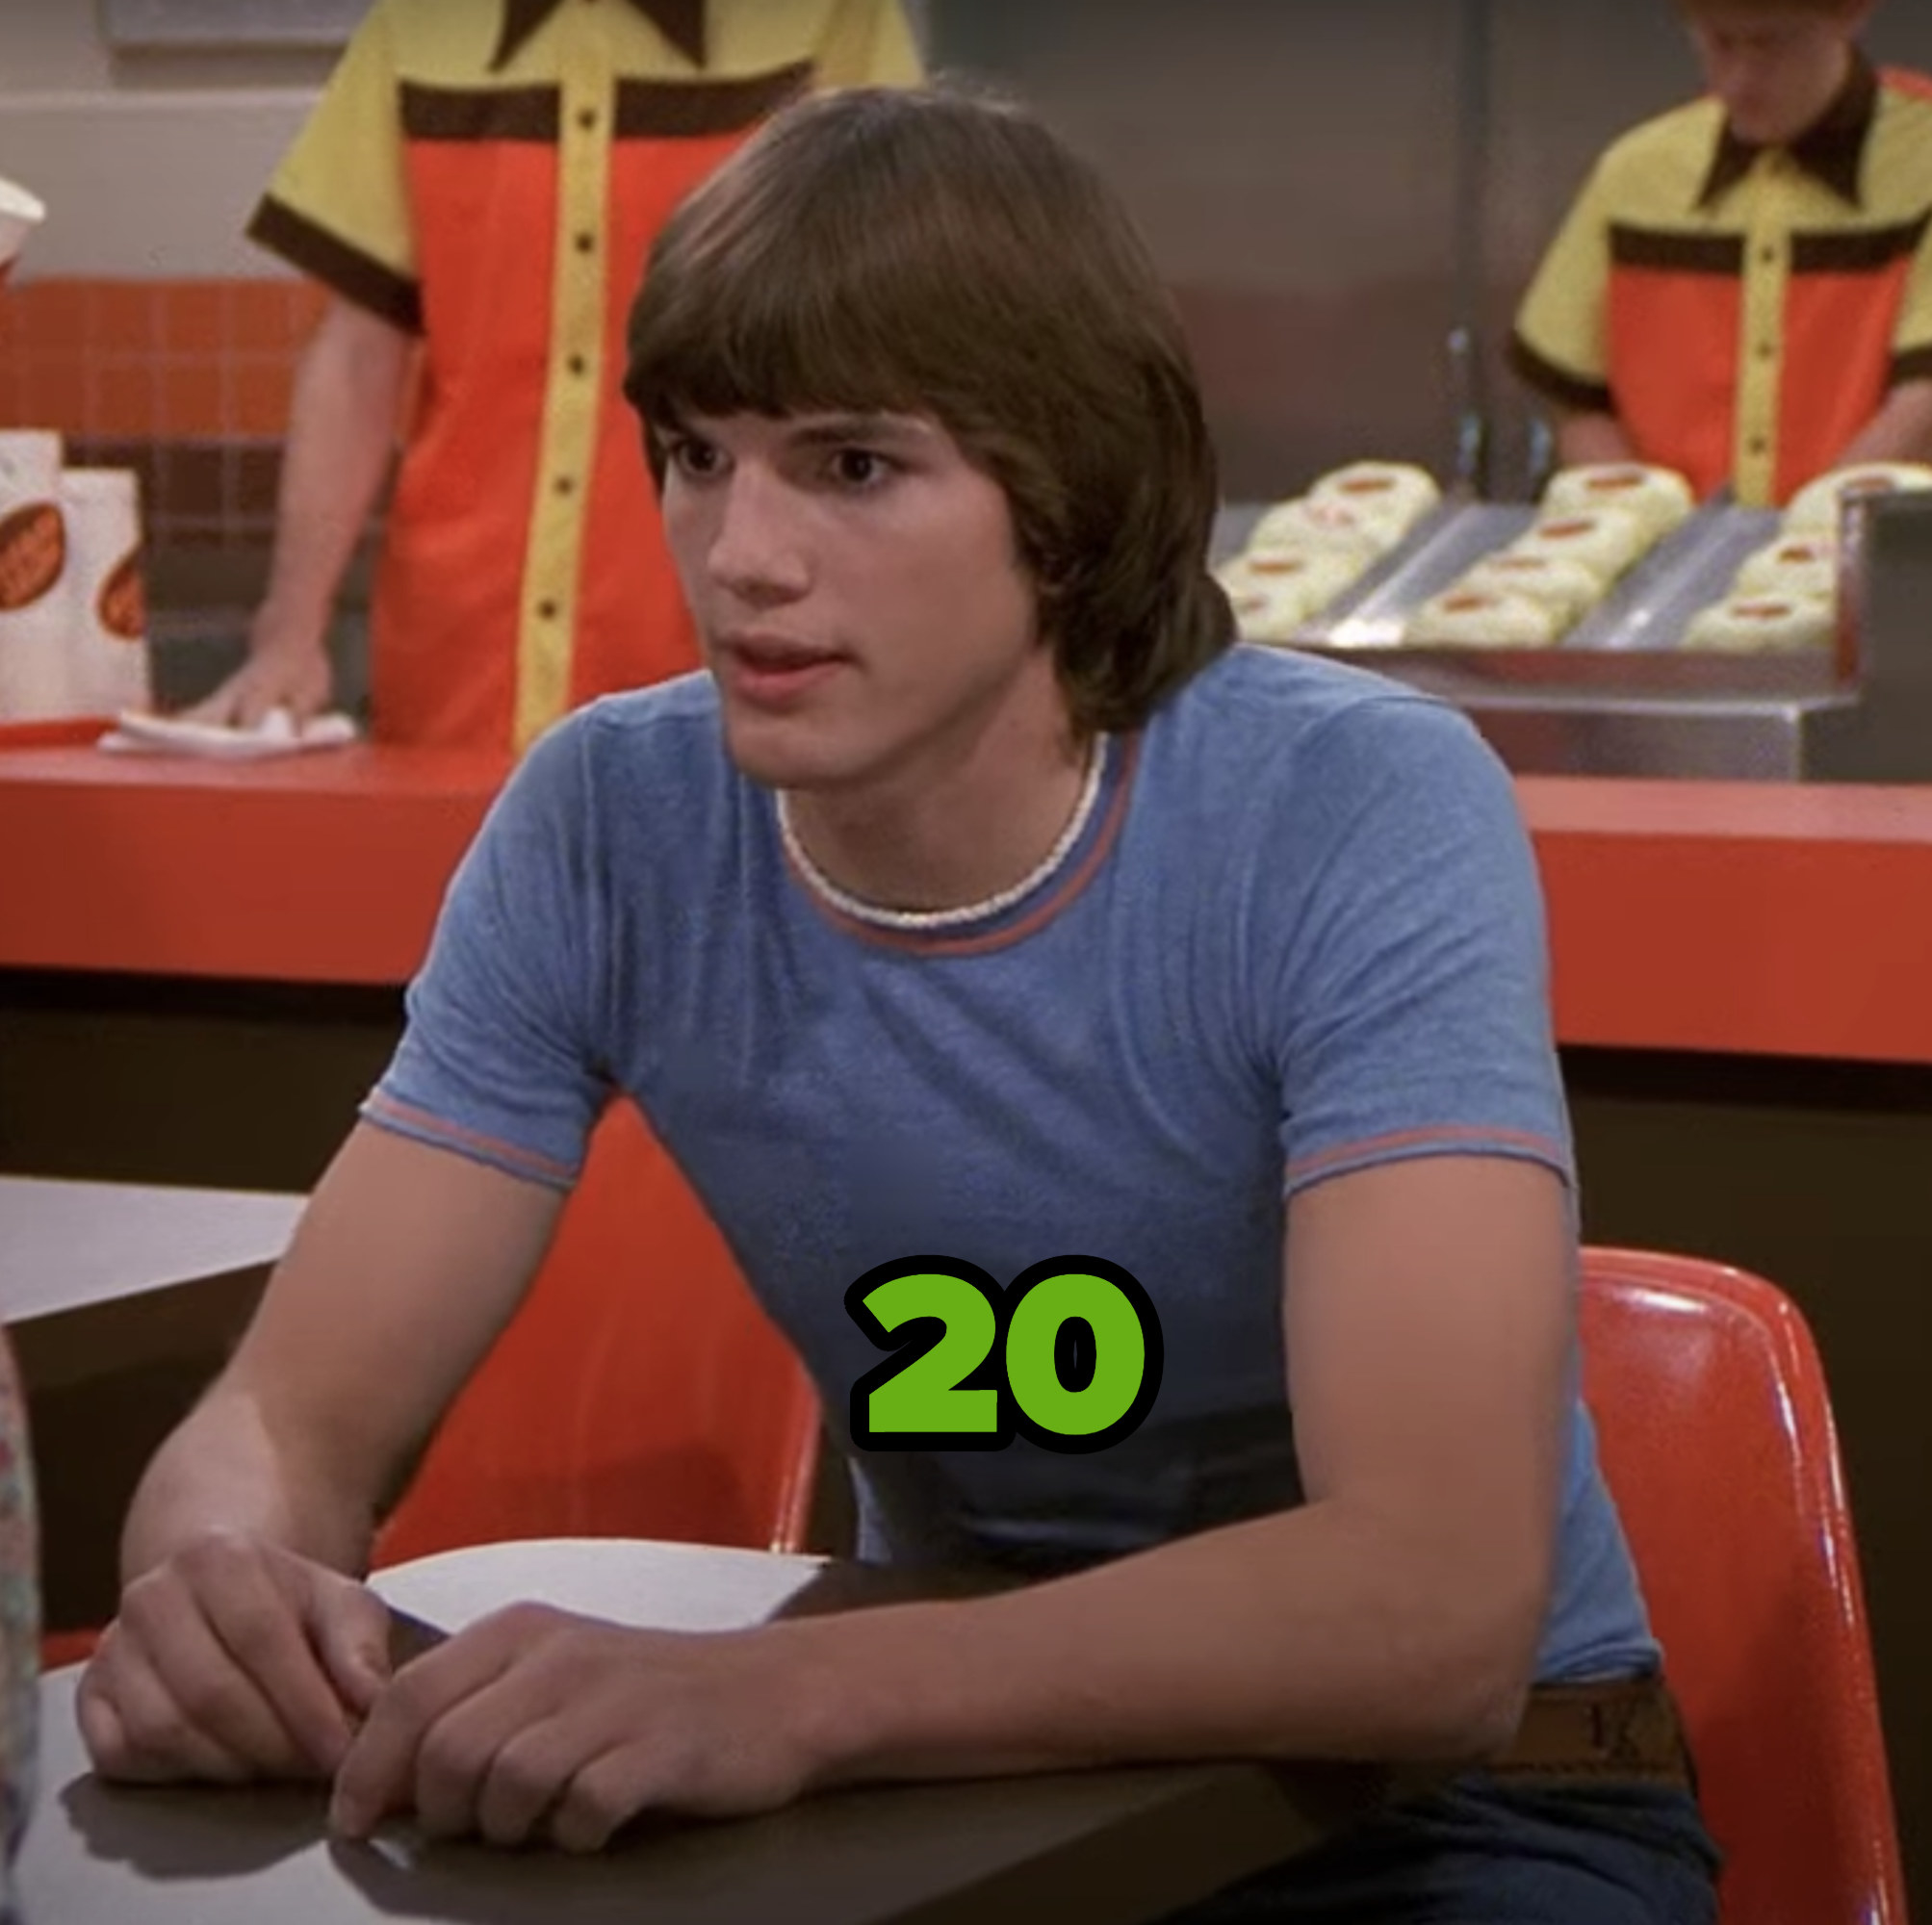 Ashton in a scene from the show